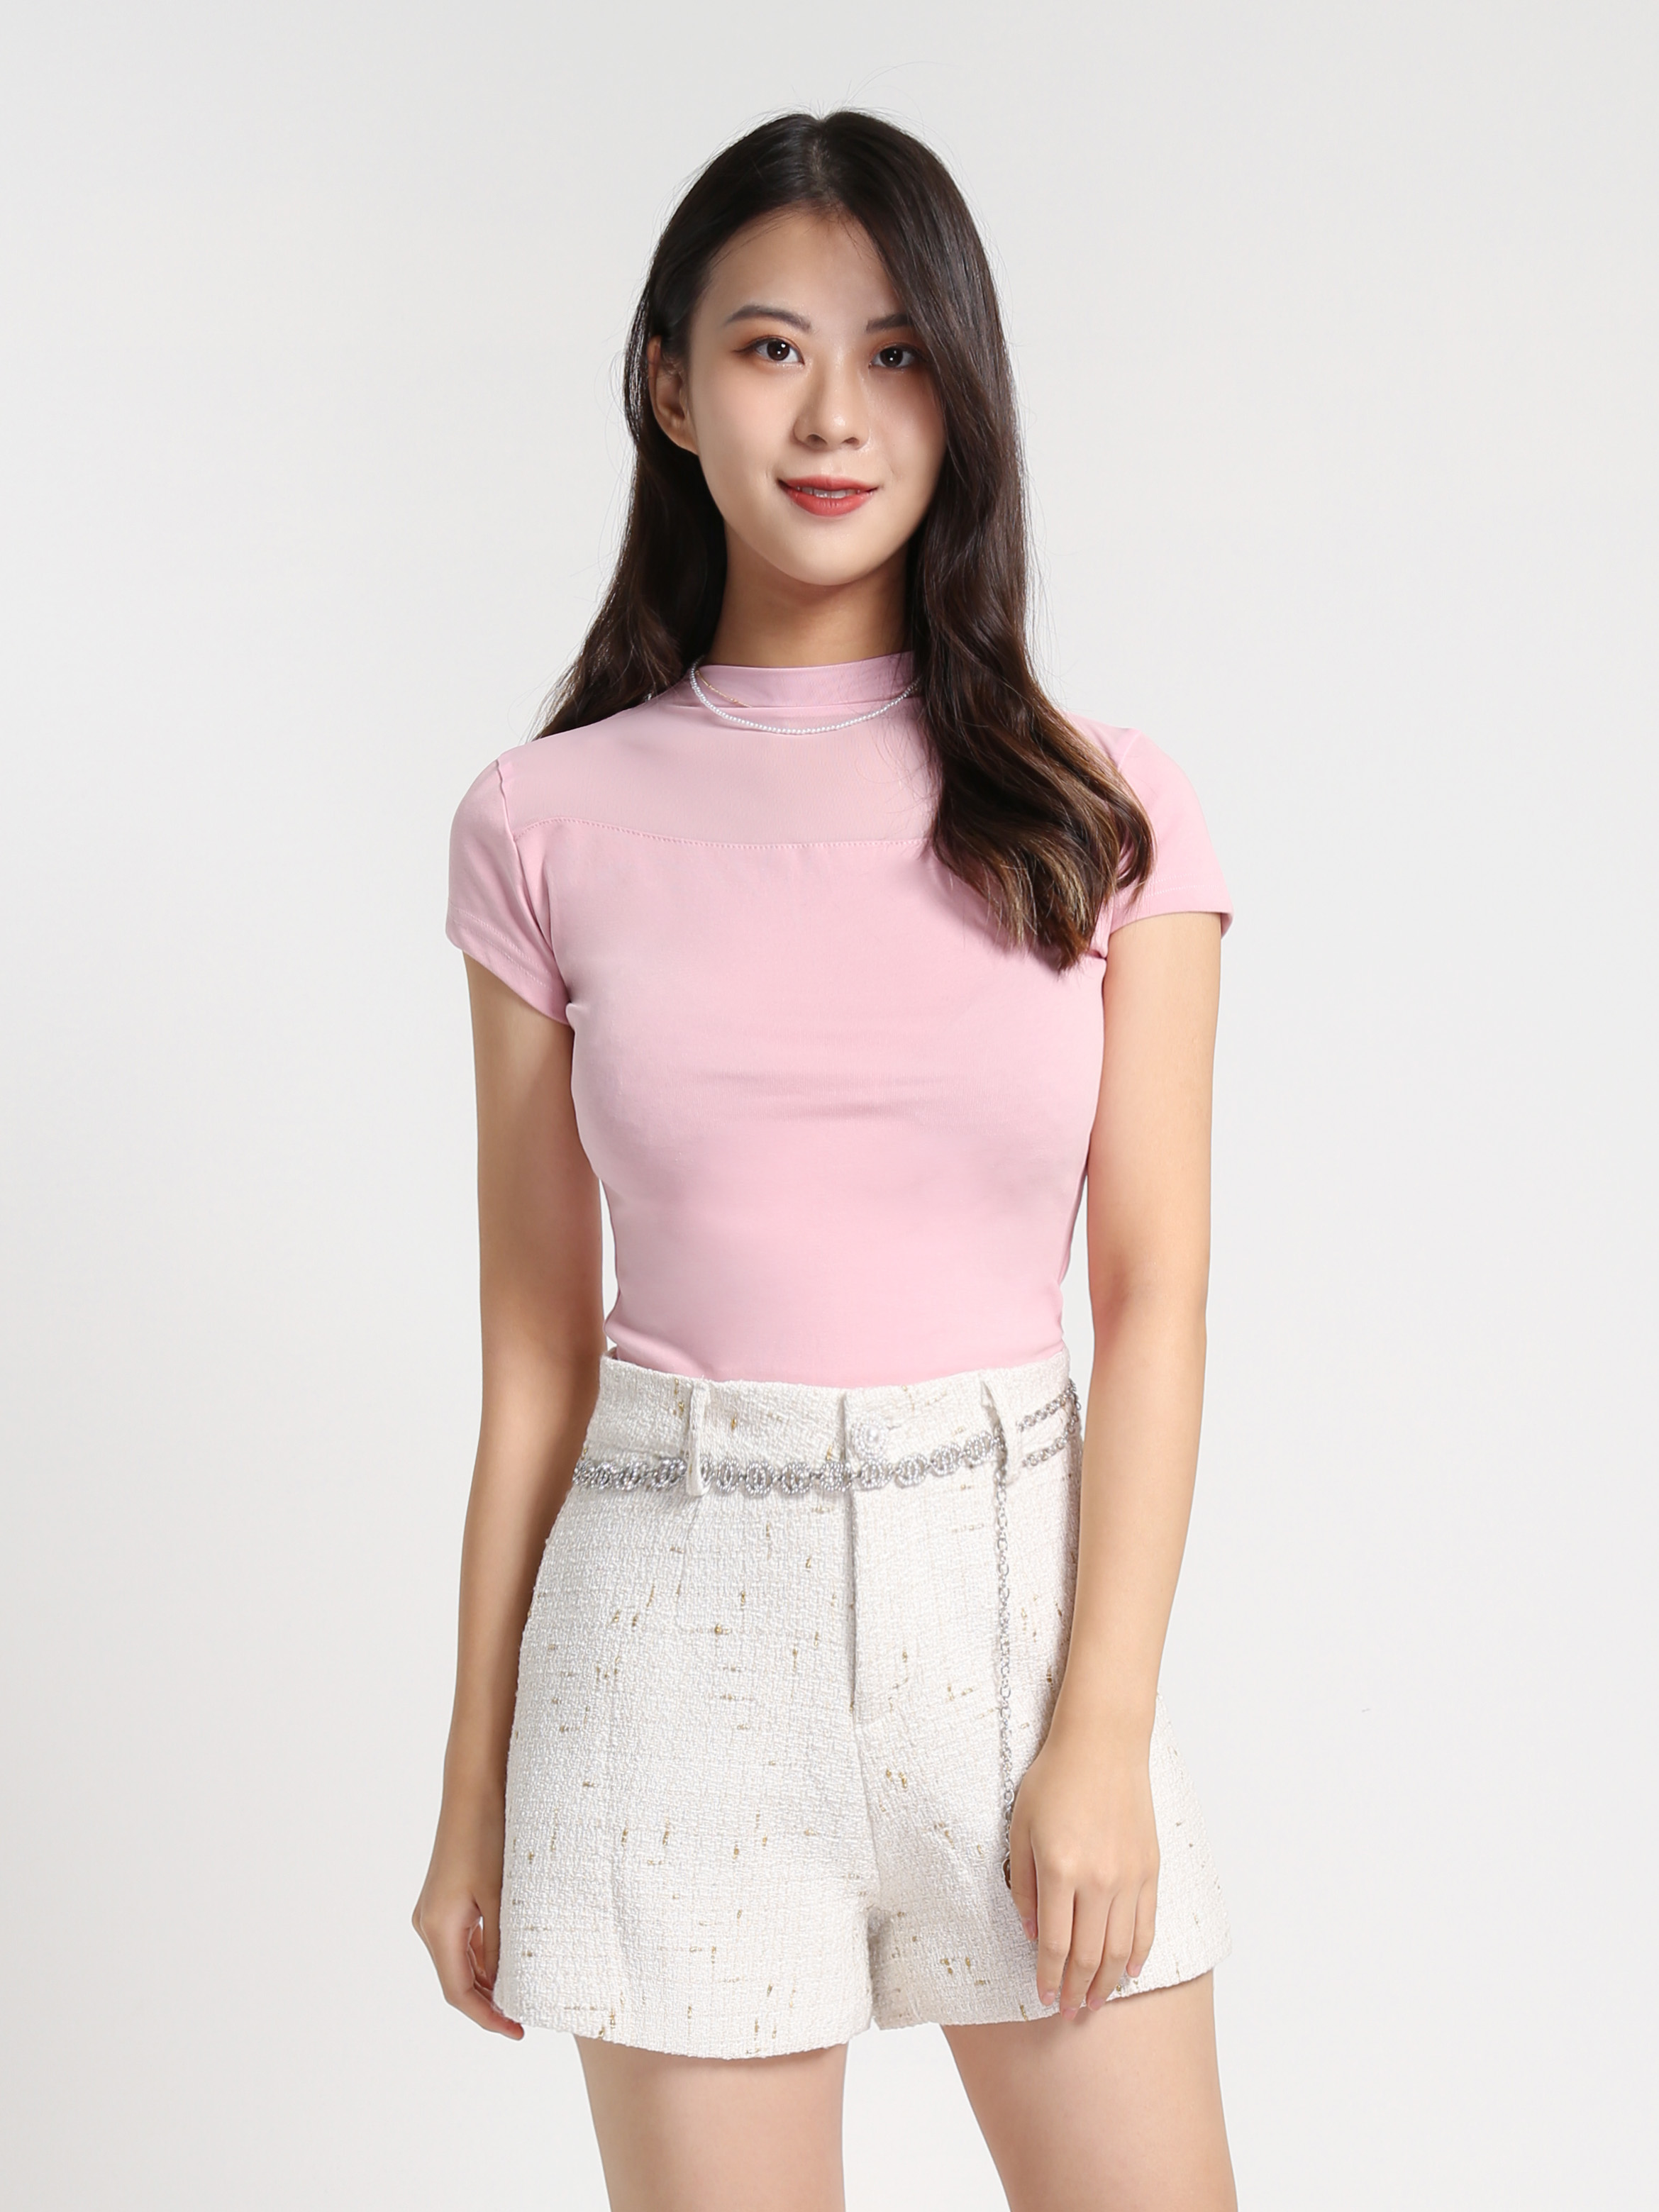 Turtle Neck With Net Short Sleeve Top 27871 (SO)